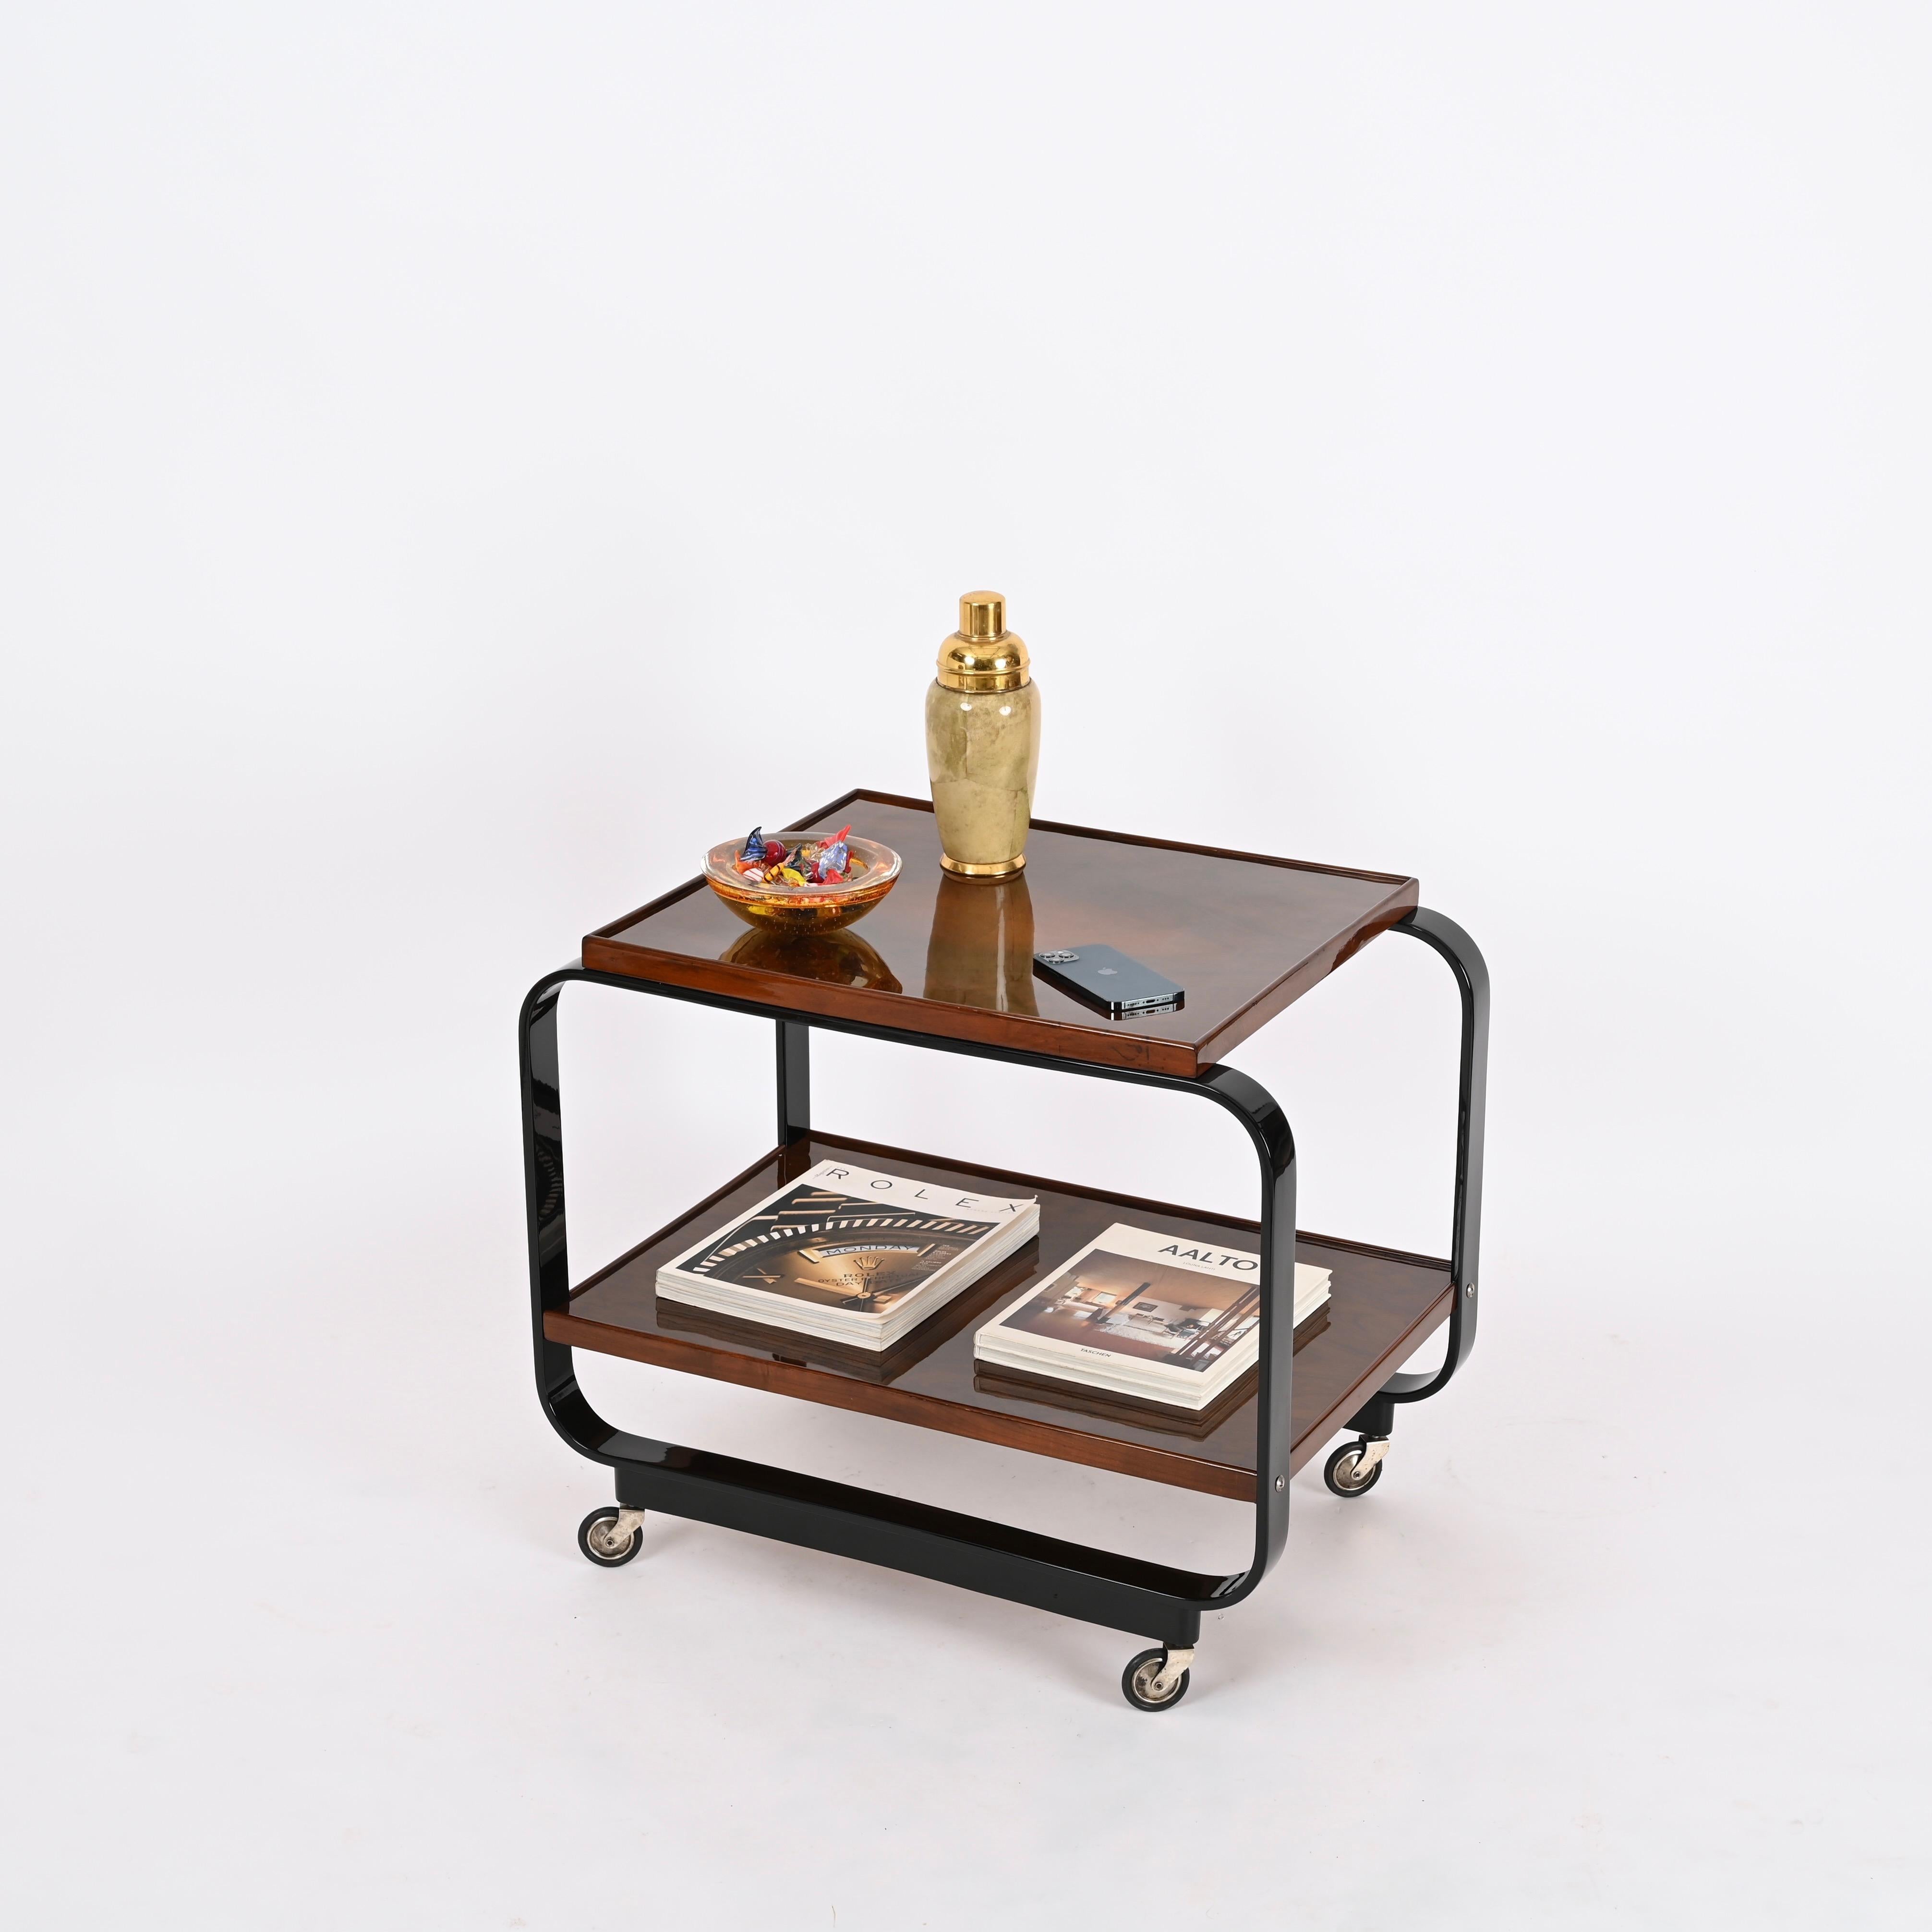 Mid-20th Century Serving Bar Cart by Gino Maggioni Signed, Bent Curly Walnut Wood, Italy, 1930s For Sale